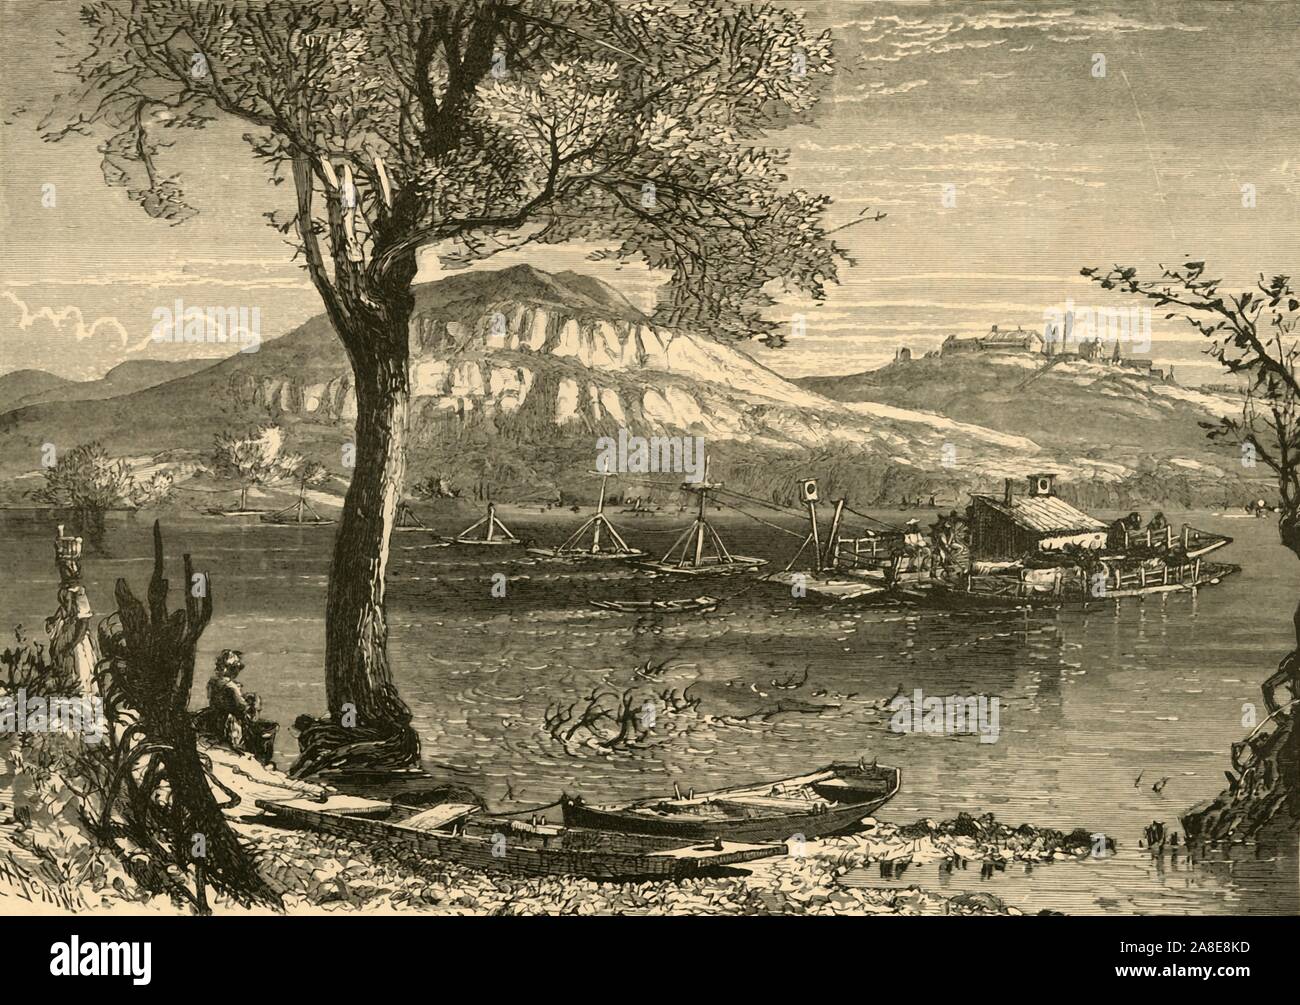 'Ferry at Chattanooga', 1872. Cable ferry across the Tennessee River near Chattanooga, Tennessee, USA. From &quot;Picturesque America; or, The Land We Live In, A Delineation by Pen and Pencil of the Mountains, Rivers, Lakes...with Illustrations on Steel and Wood by Eminent American Artists&quot; Vol. I, edited by William Cullen Bryant. [D. Appleton and Company, New York, 1872] Stock Photo